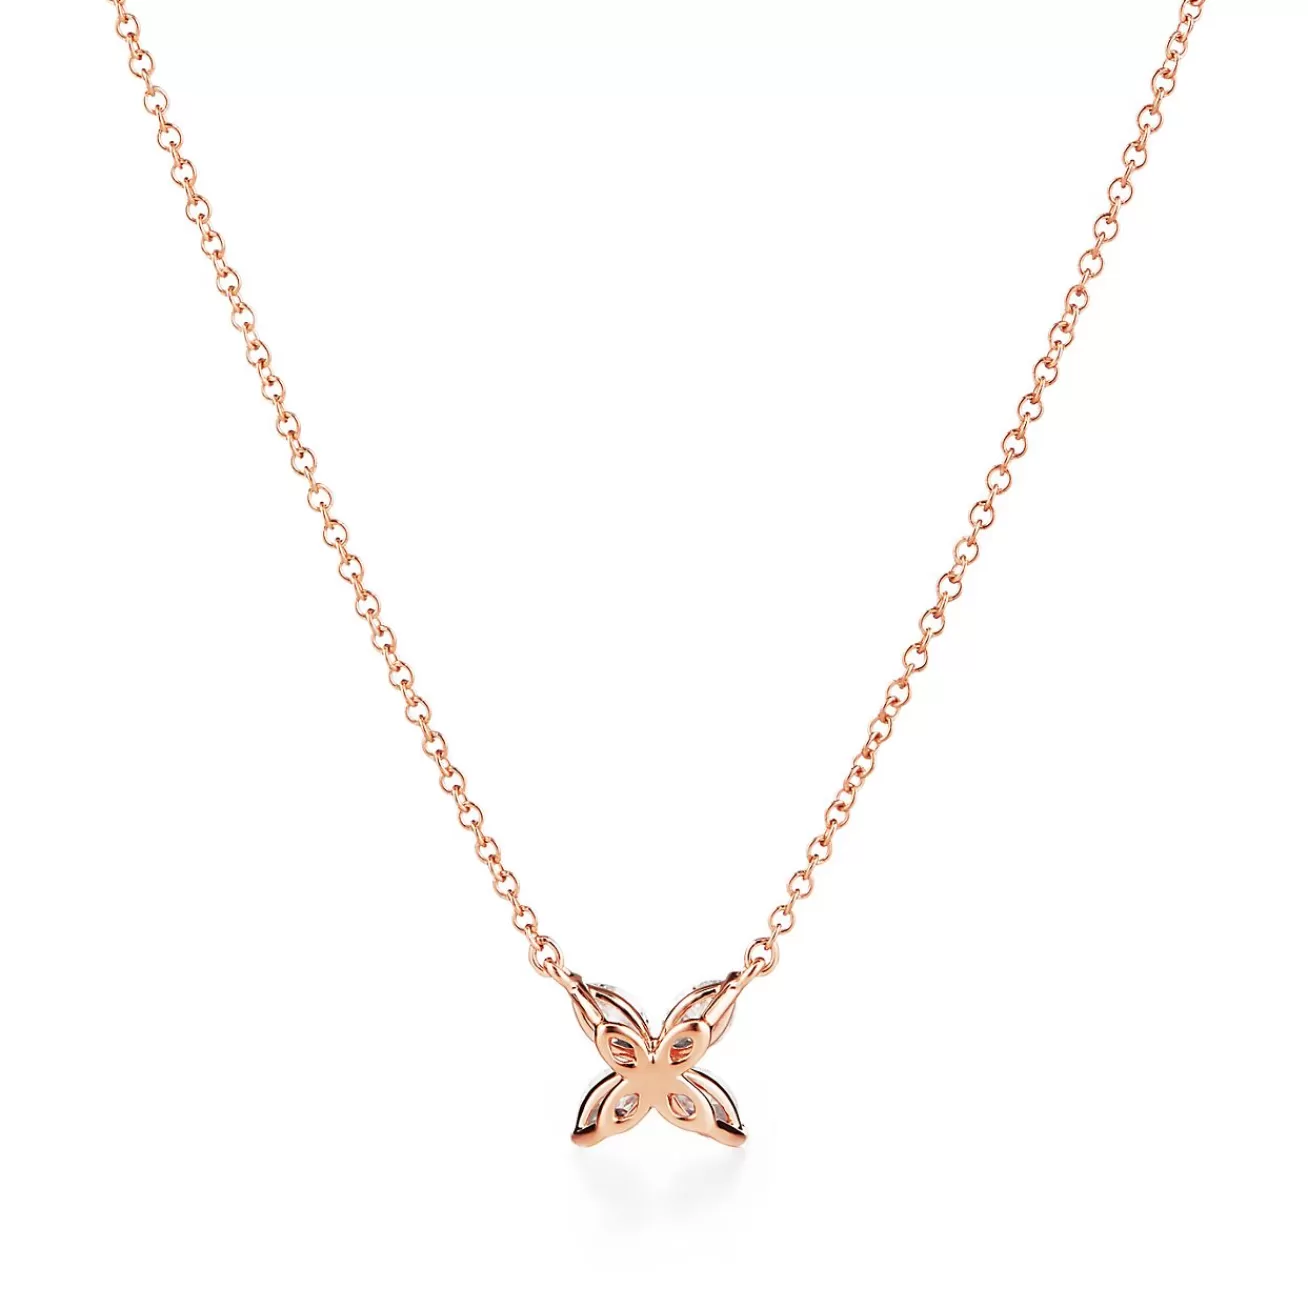 Tiffany & Co. Tiffany Victoria® pendant in 18k rose gold with diamonds, small. | ^ Necklaces & Pendants | Gifts for Her